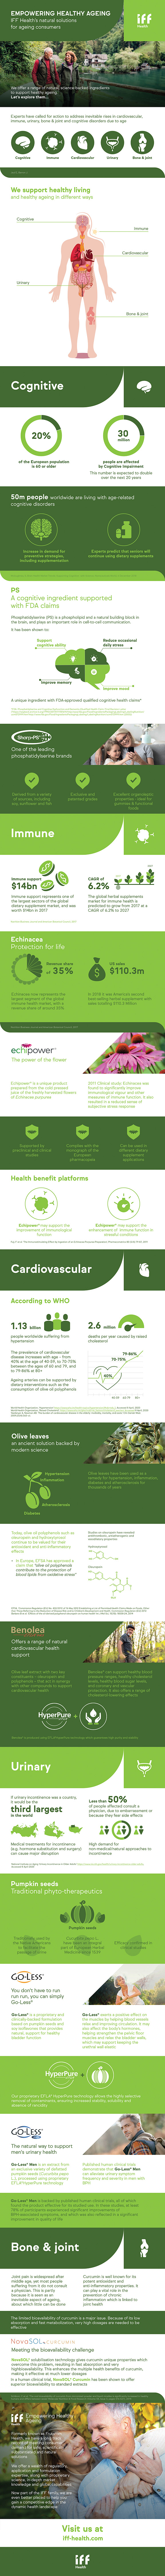 IFF Health - Infographic healthy ageing.jpg